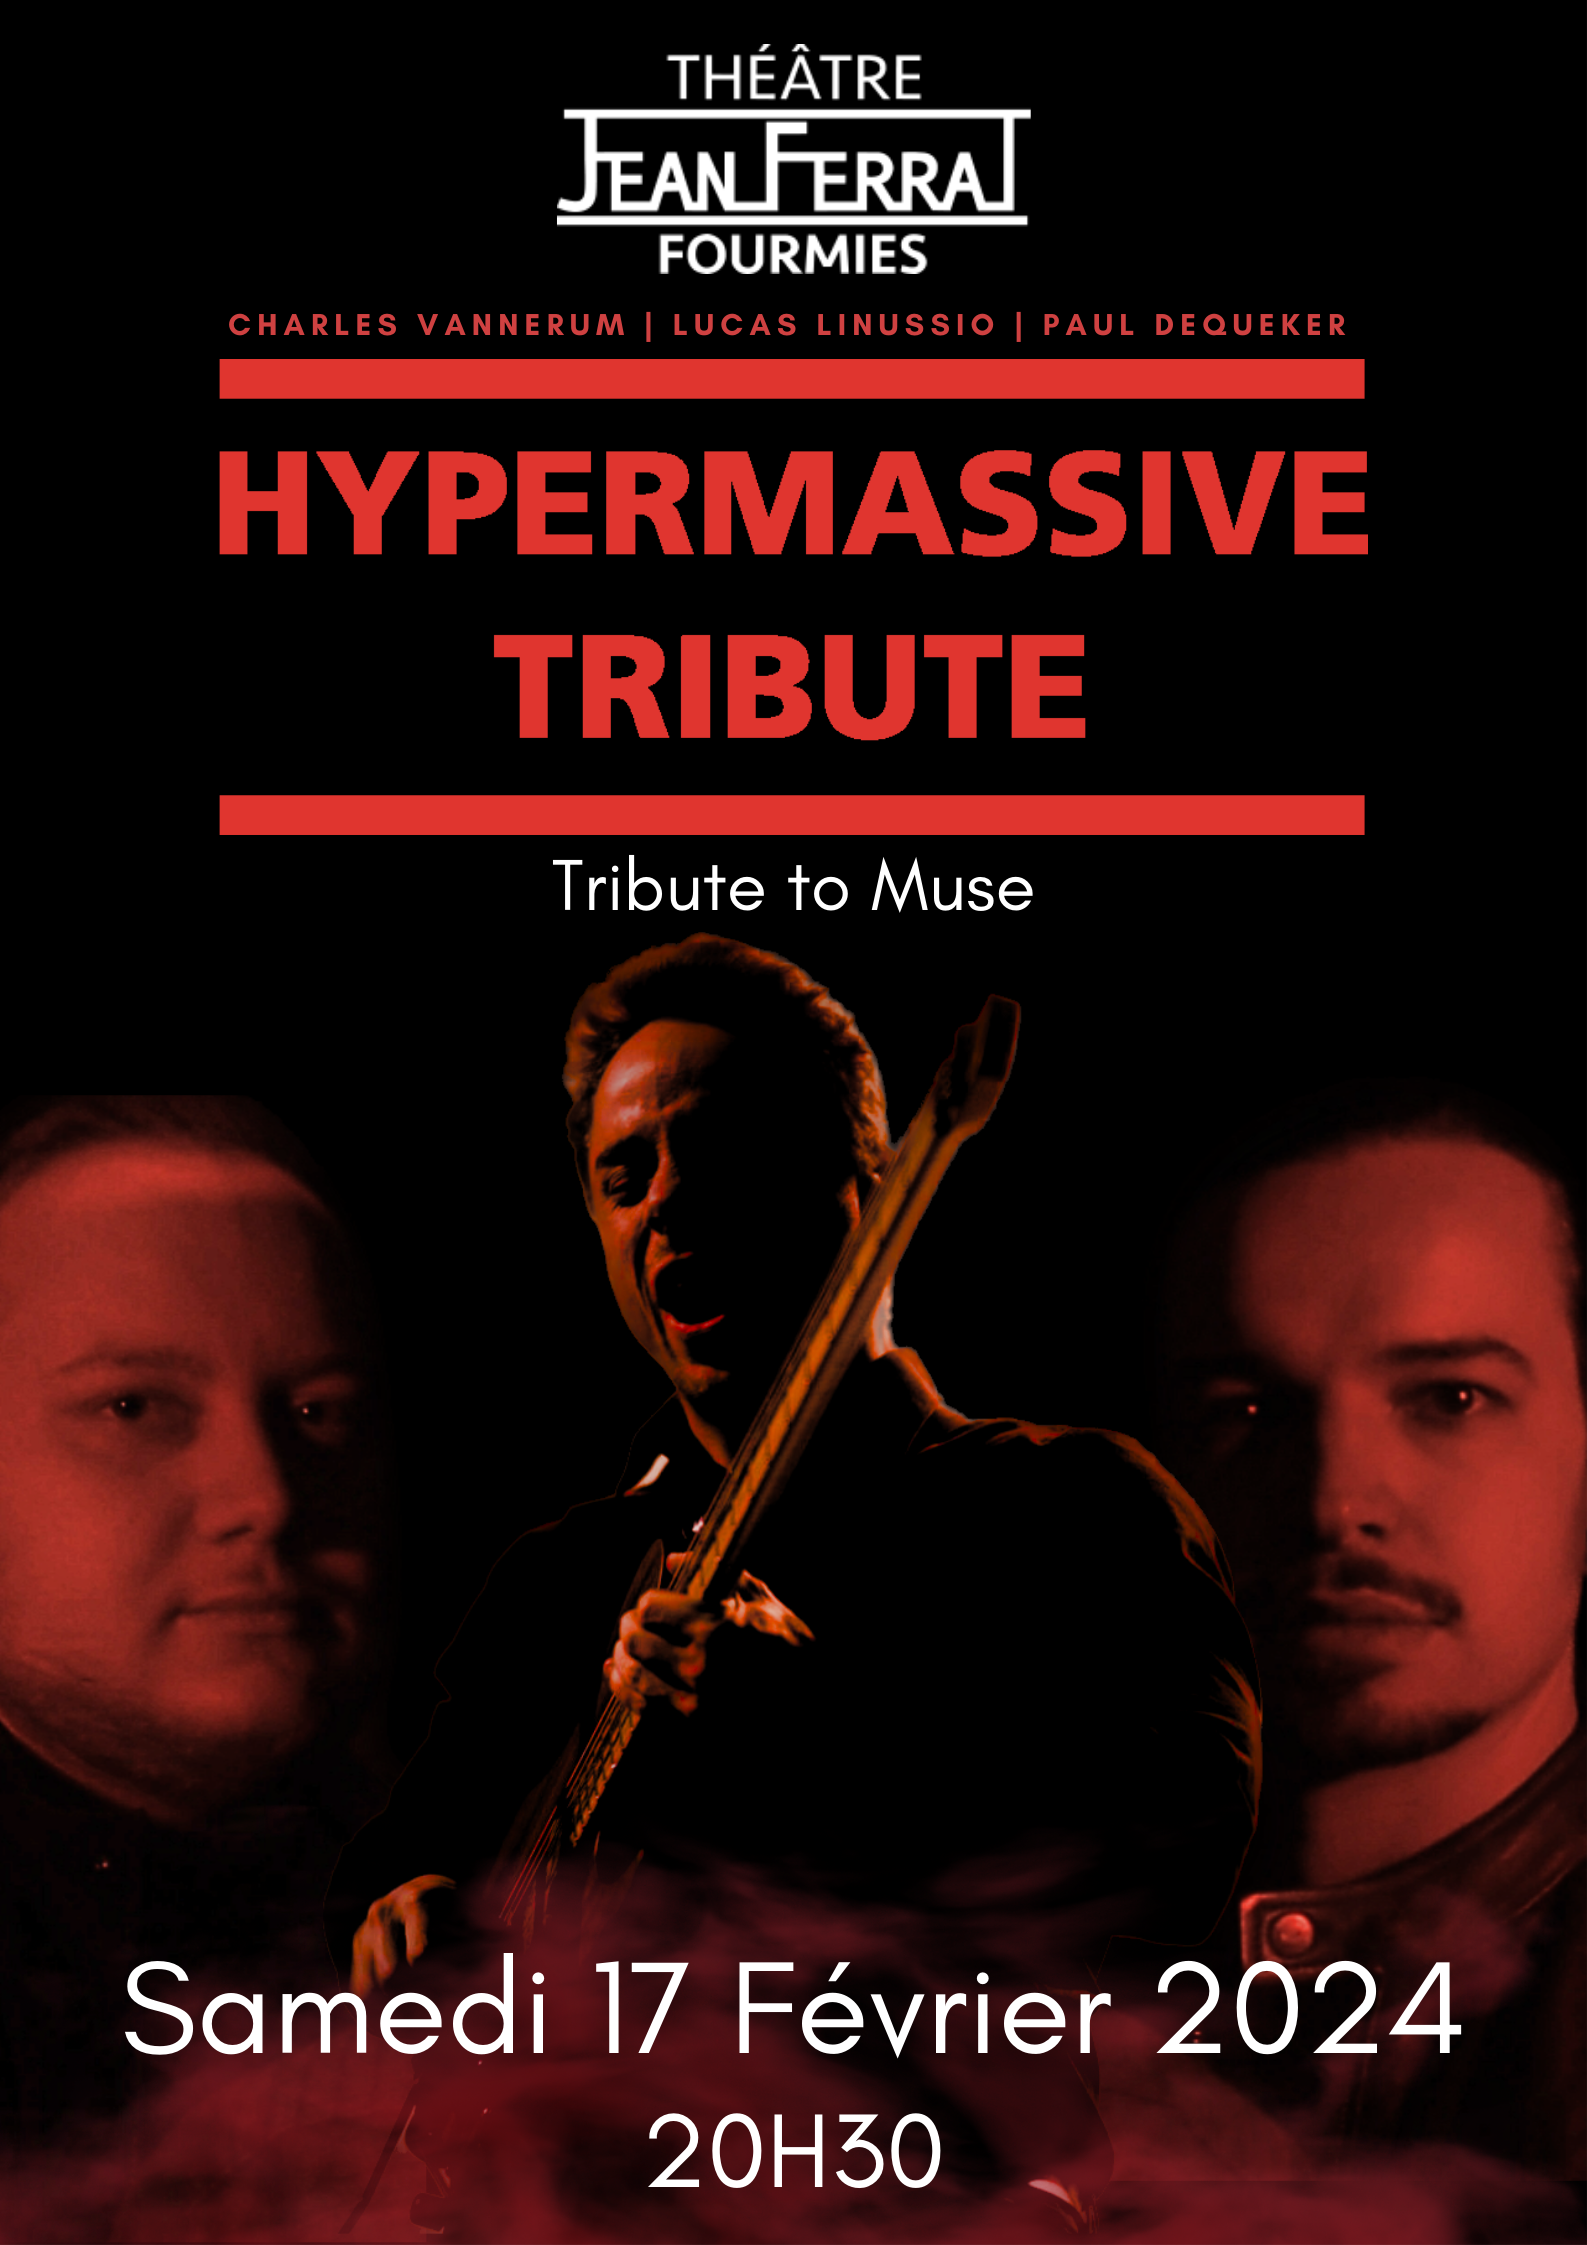 Hypermassive Tribute to Muse